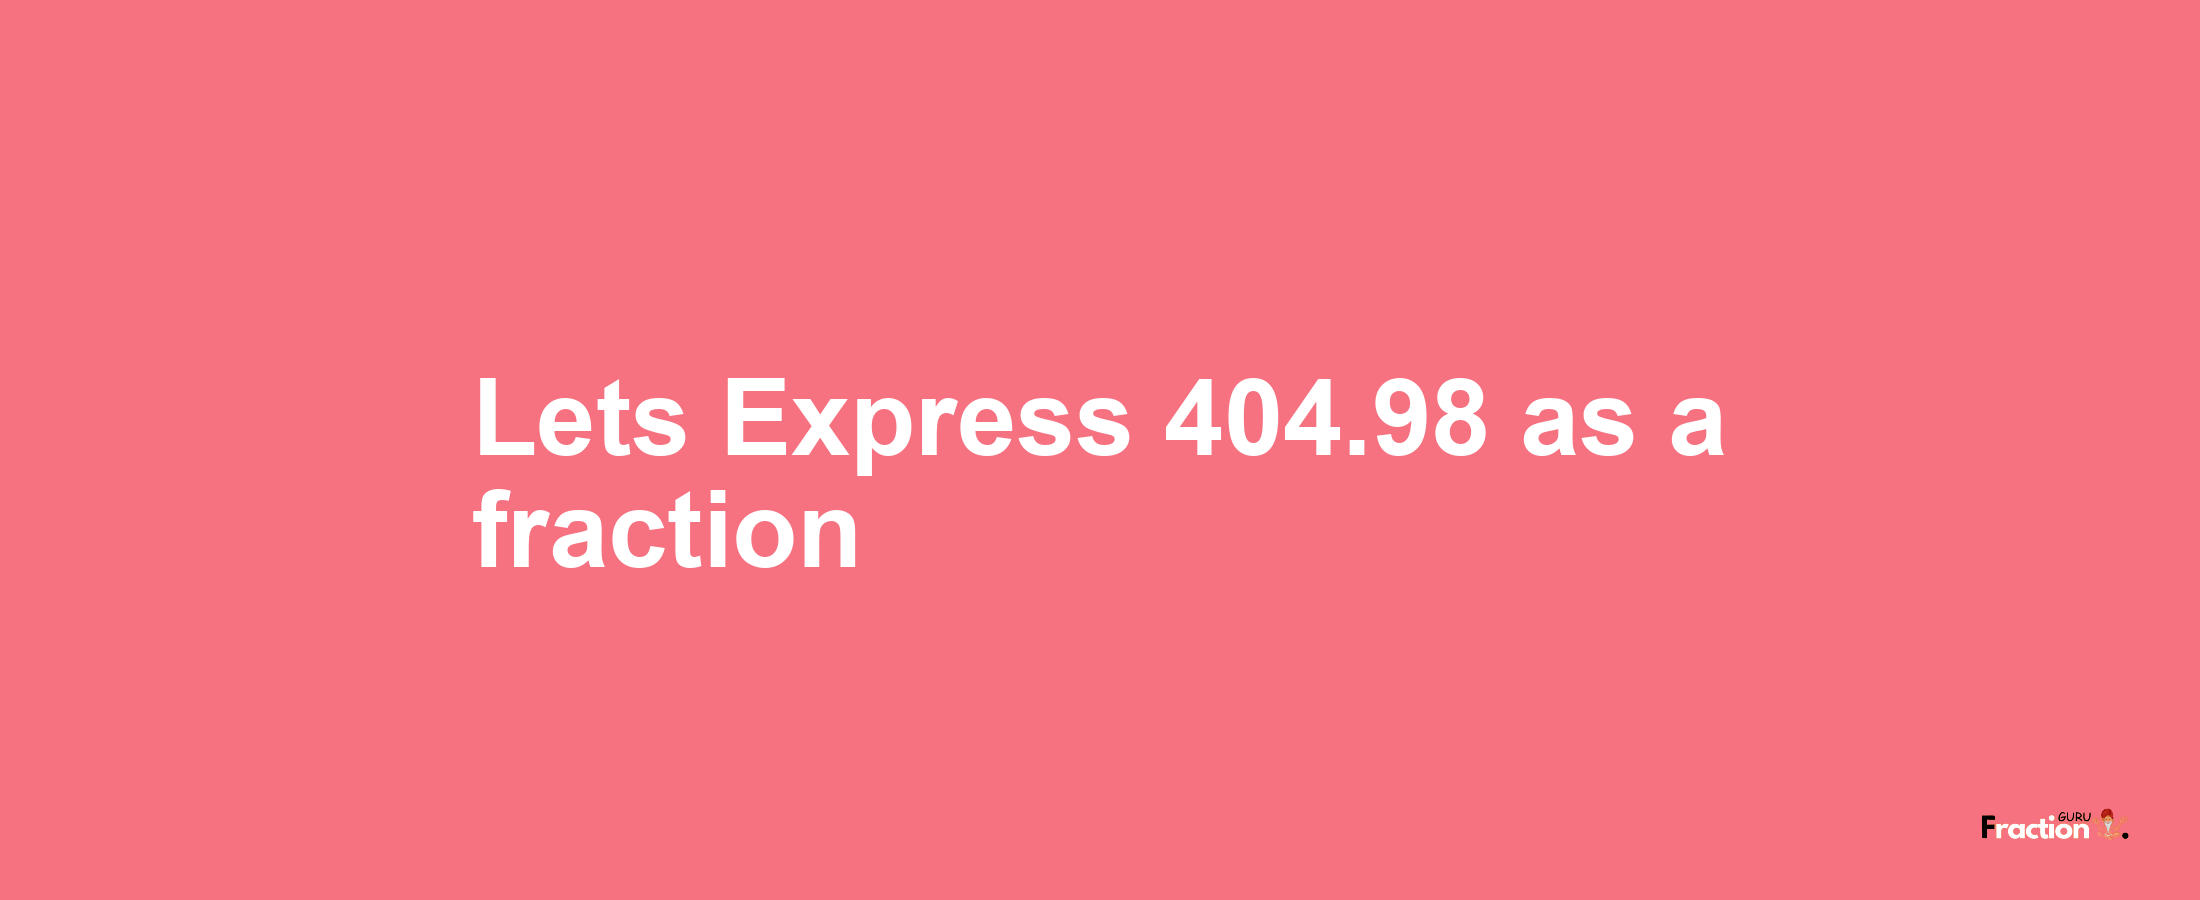 Lets Express 404.98 as afraction